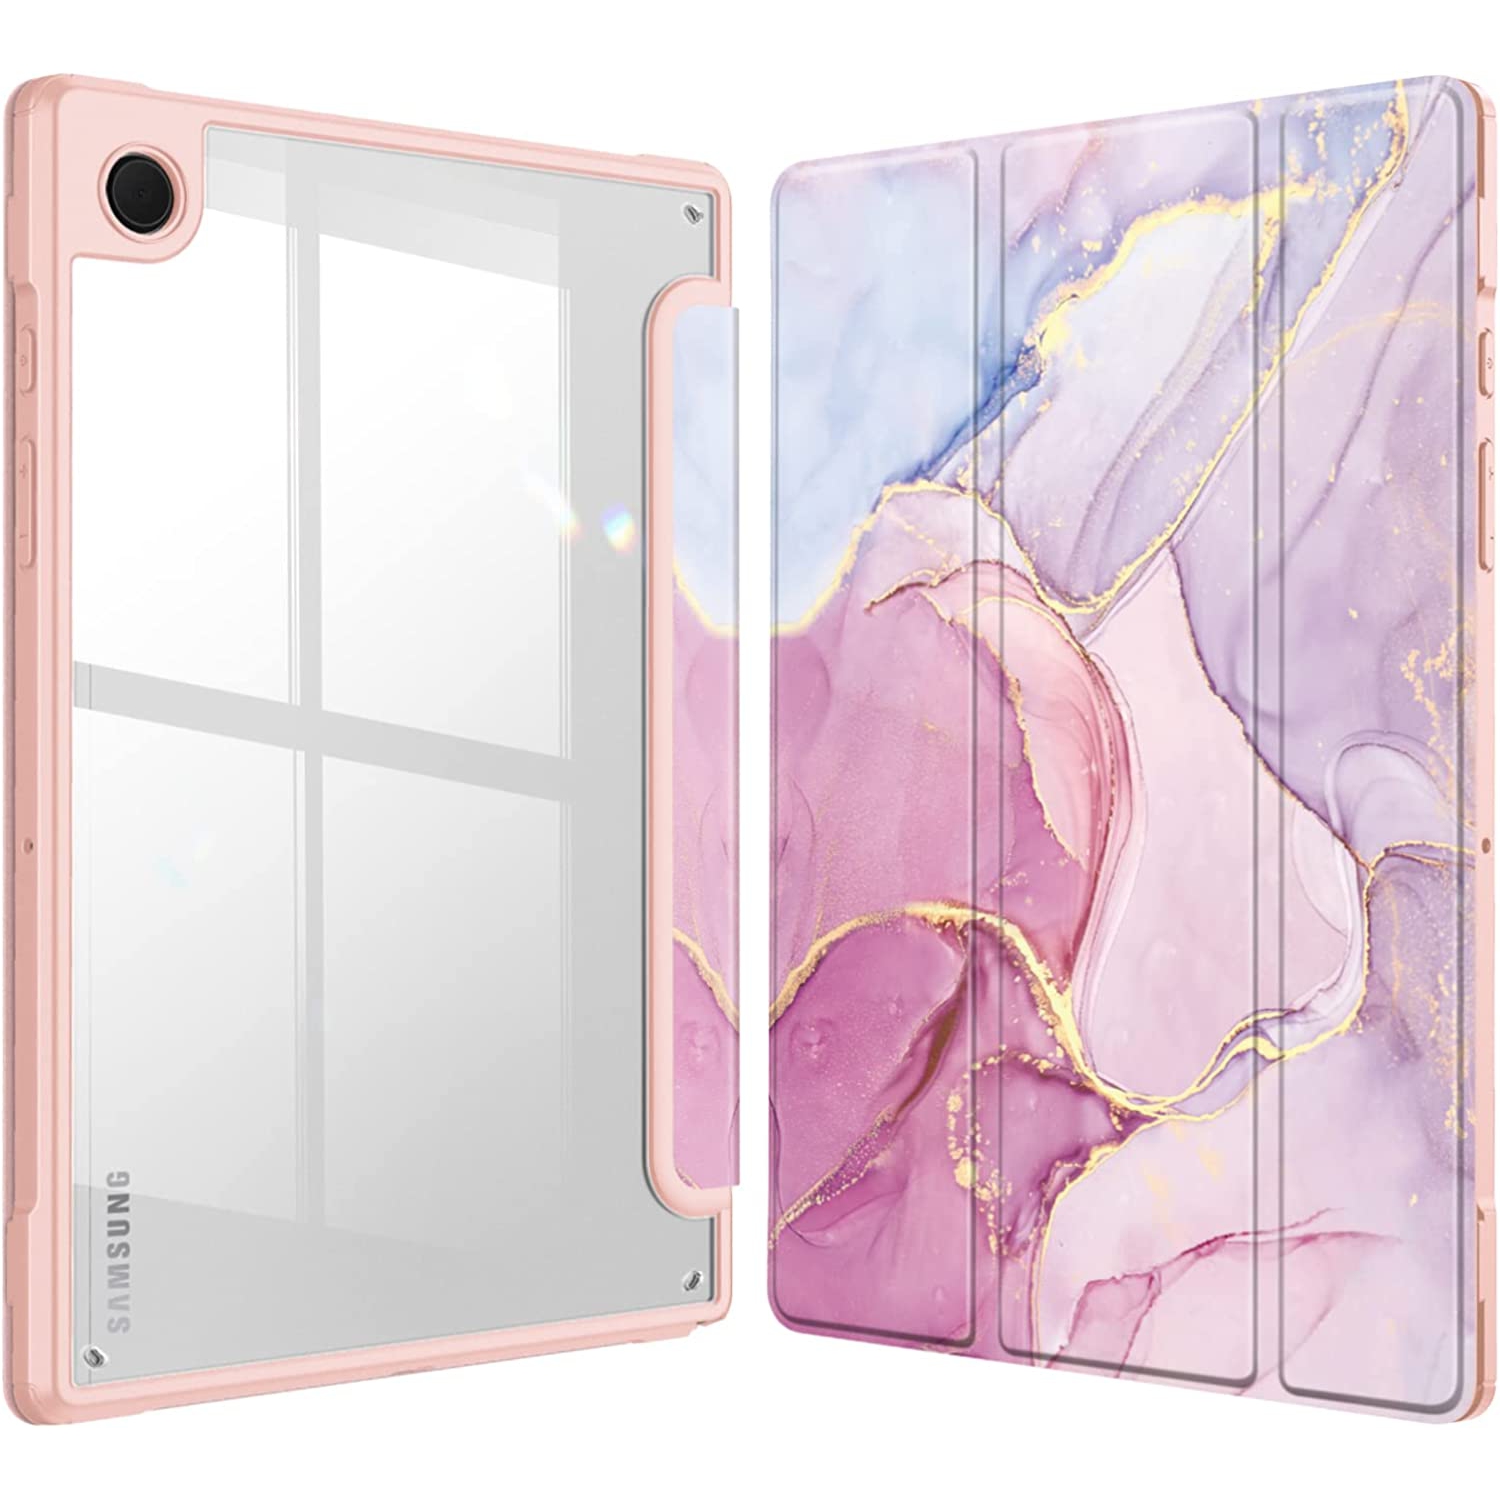 F Hybrid Slim Case for Samsung Galaxy Tab A8 10.5 inch 2022 Model (SM-X200/X205/X207), Shockproof Cover with Clear Transparent Back Shell, Auto Wake/Sleep, Glittering Marble